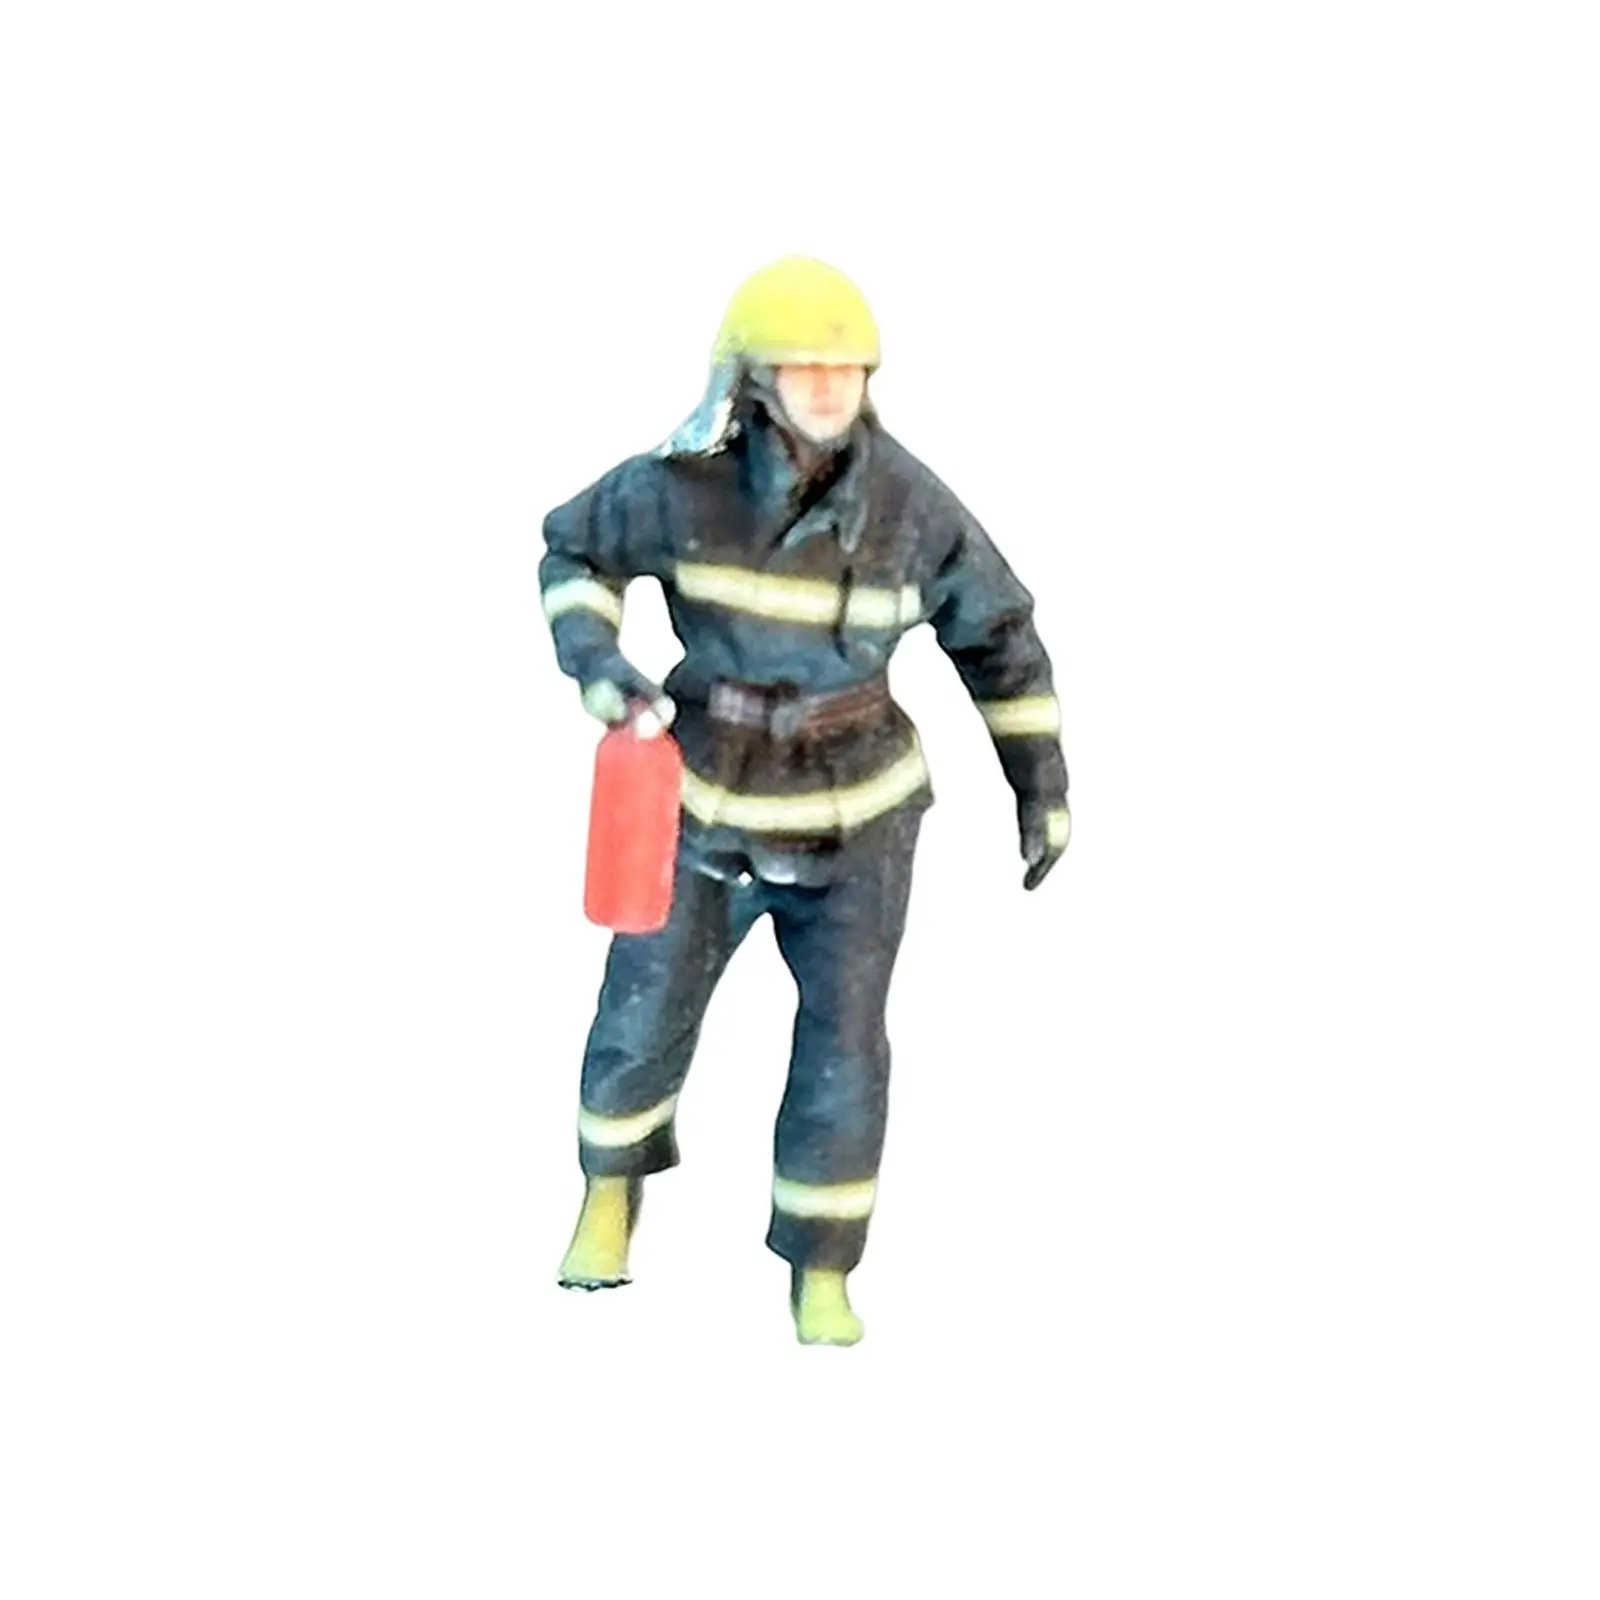 1/64 Scale Firefighter Model Collectibles Model Trains People Figures for Photography Props Building Miniature Scene Accessories